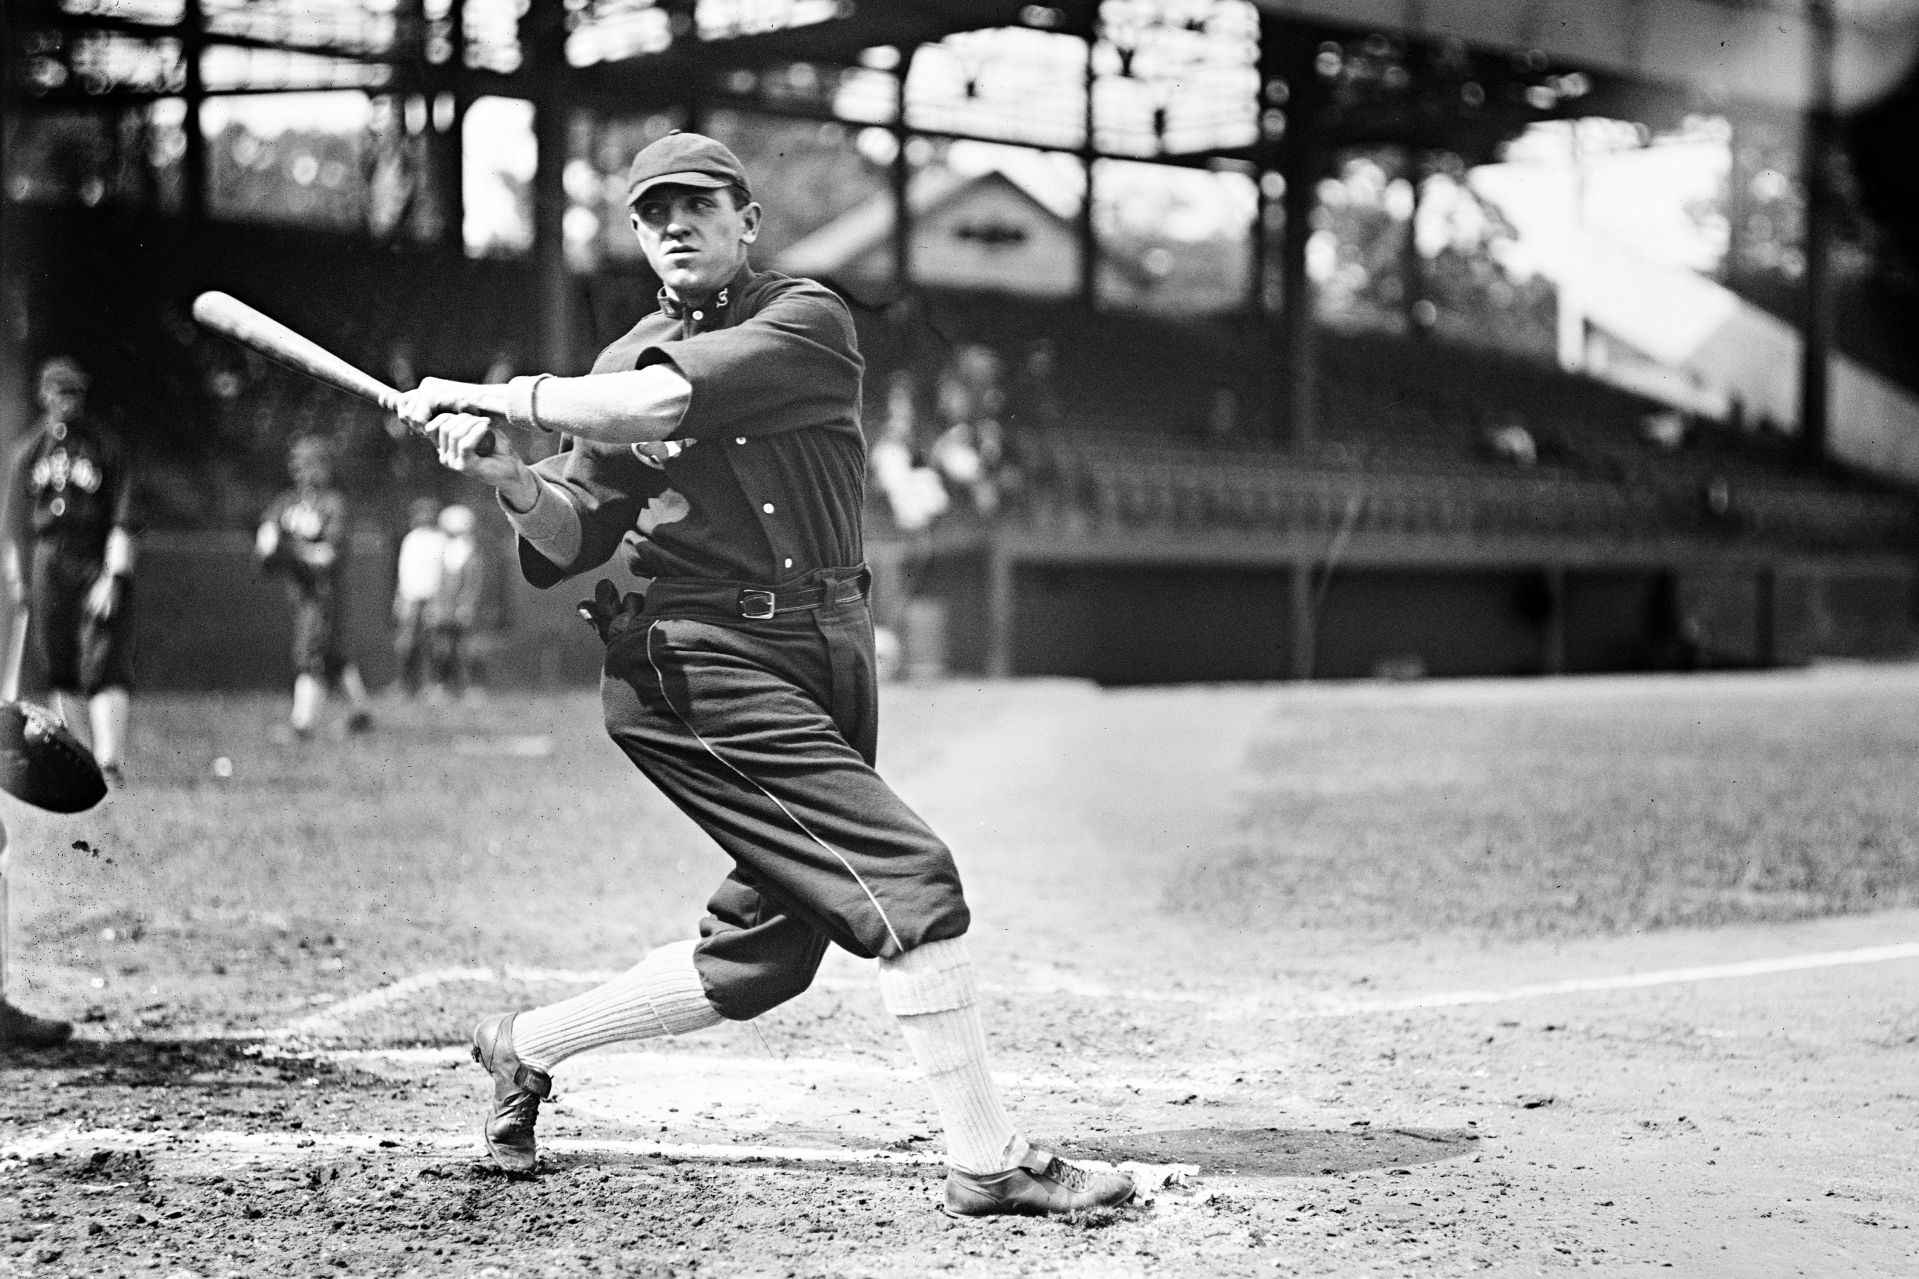 Title: [Harry Lord, Chicago AL (baseball)]Creator(s): Harris & Ewing, photographerDate Created/Published: 1913.Medium: 1 negative : glass ; 5 x 7 in. or smallerReproduction Number: LC-DIG-hec-02779 (digital file from original negative)Rights Advisory: No known restrictions on publication. For more information, see Harris & Ewing Photographs - Rights and Restrictions Information(http://www.loc.gov/rr/print/res/140_harr.html)Call Number: LC-H261- 2742 [P&P]Repository: Library of Congress Prints and Photographs Division Washington, D.C. 20540 USA http://hdl.loc.gov/loc.pnp/pp.printNotes:Original unverified caption data received with the Harris & Ewing Collection: Baseball, Professional, Chicago Players.Corrected title based on research by the Pictorial History Committee, Society for American Baseball Research, 2009.Gift; Harris & Ewing, Inc. 1955.General information about the Harris & Ewing Collection is available at http://hdl.loc.gov/loc.pnp/pp.hecTemp. note: Batch one.Format:Glass negatives.Collections:Harris & Ewing CollectionPart of: Harris & Ewing photograph collectionBookmark This Record: https://www.loc.gov/pictures/item/2016884157/